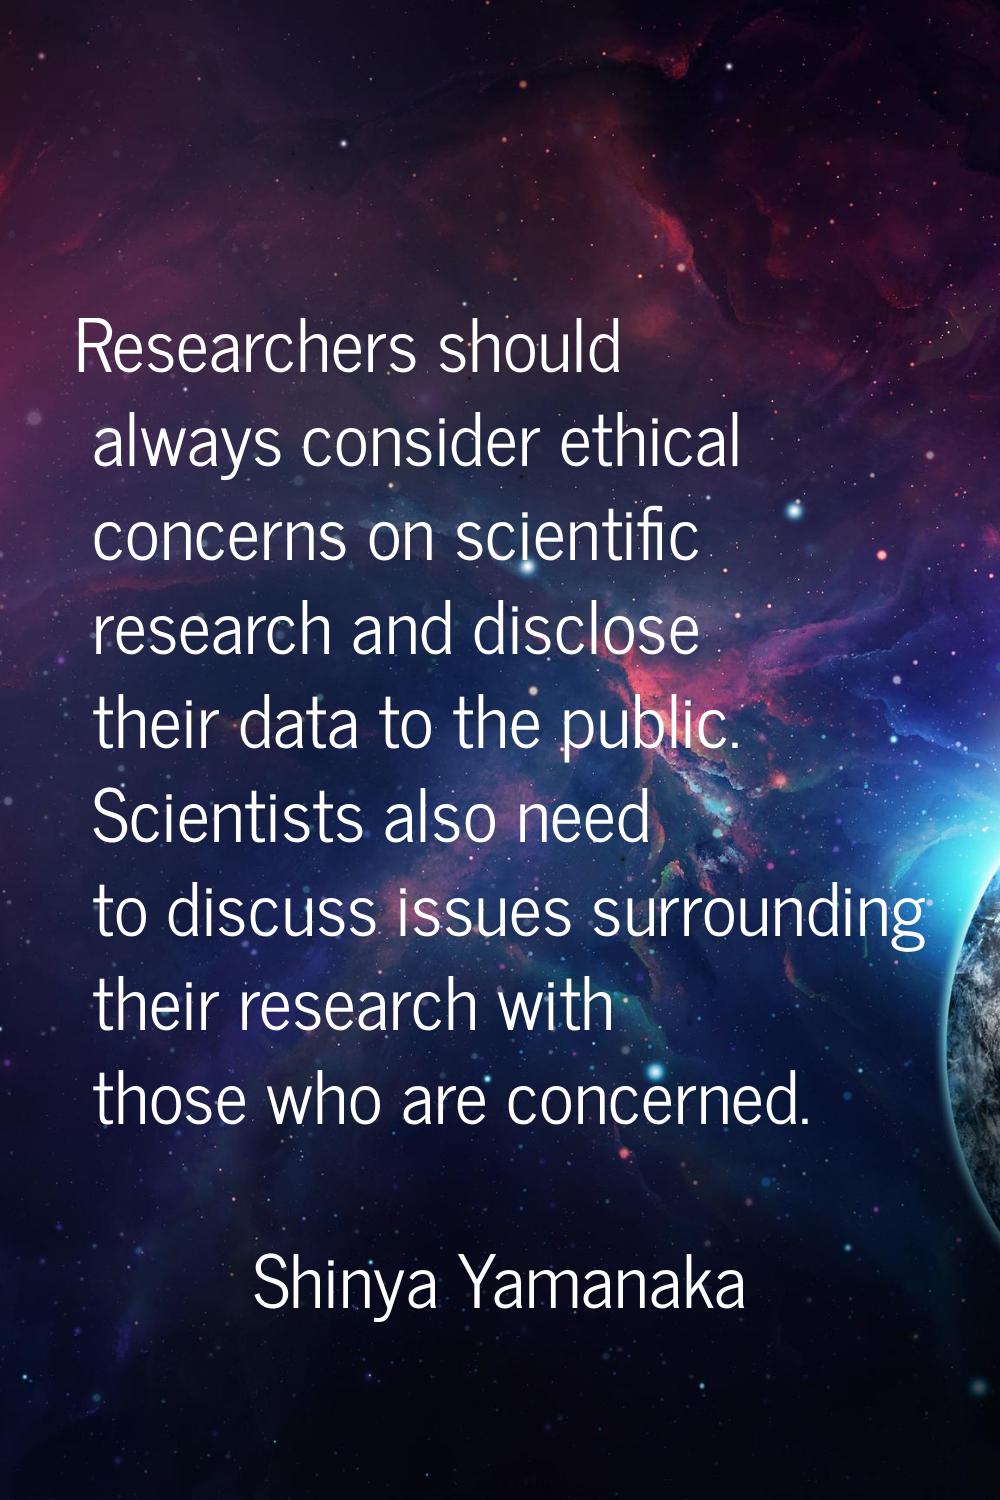 Researchers should always consider ethical concerns on scientific research and disclose their data 